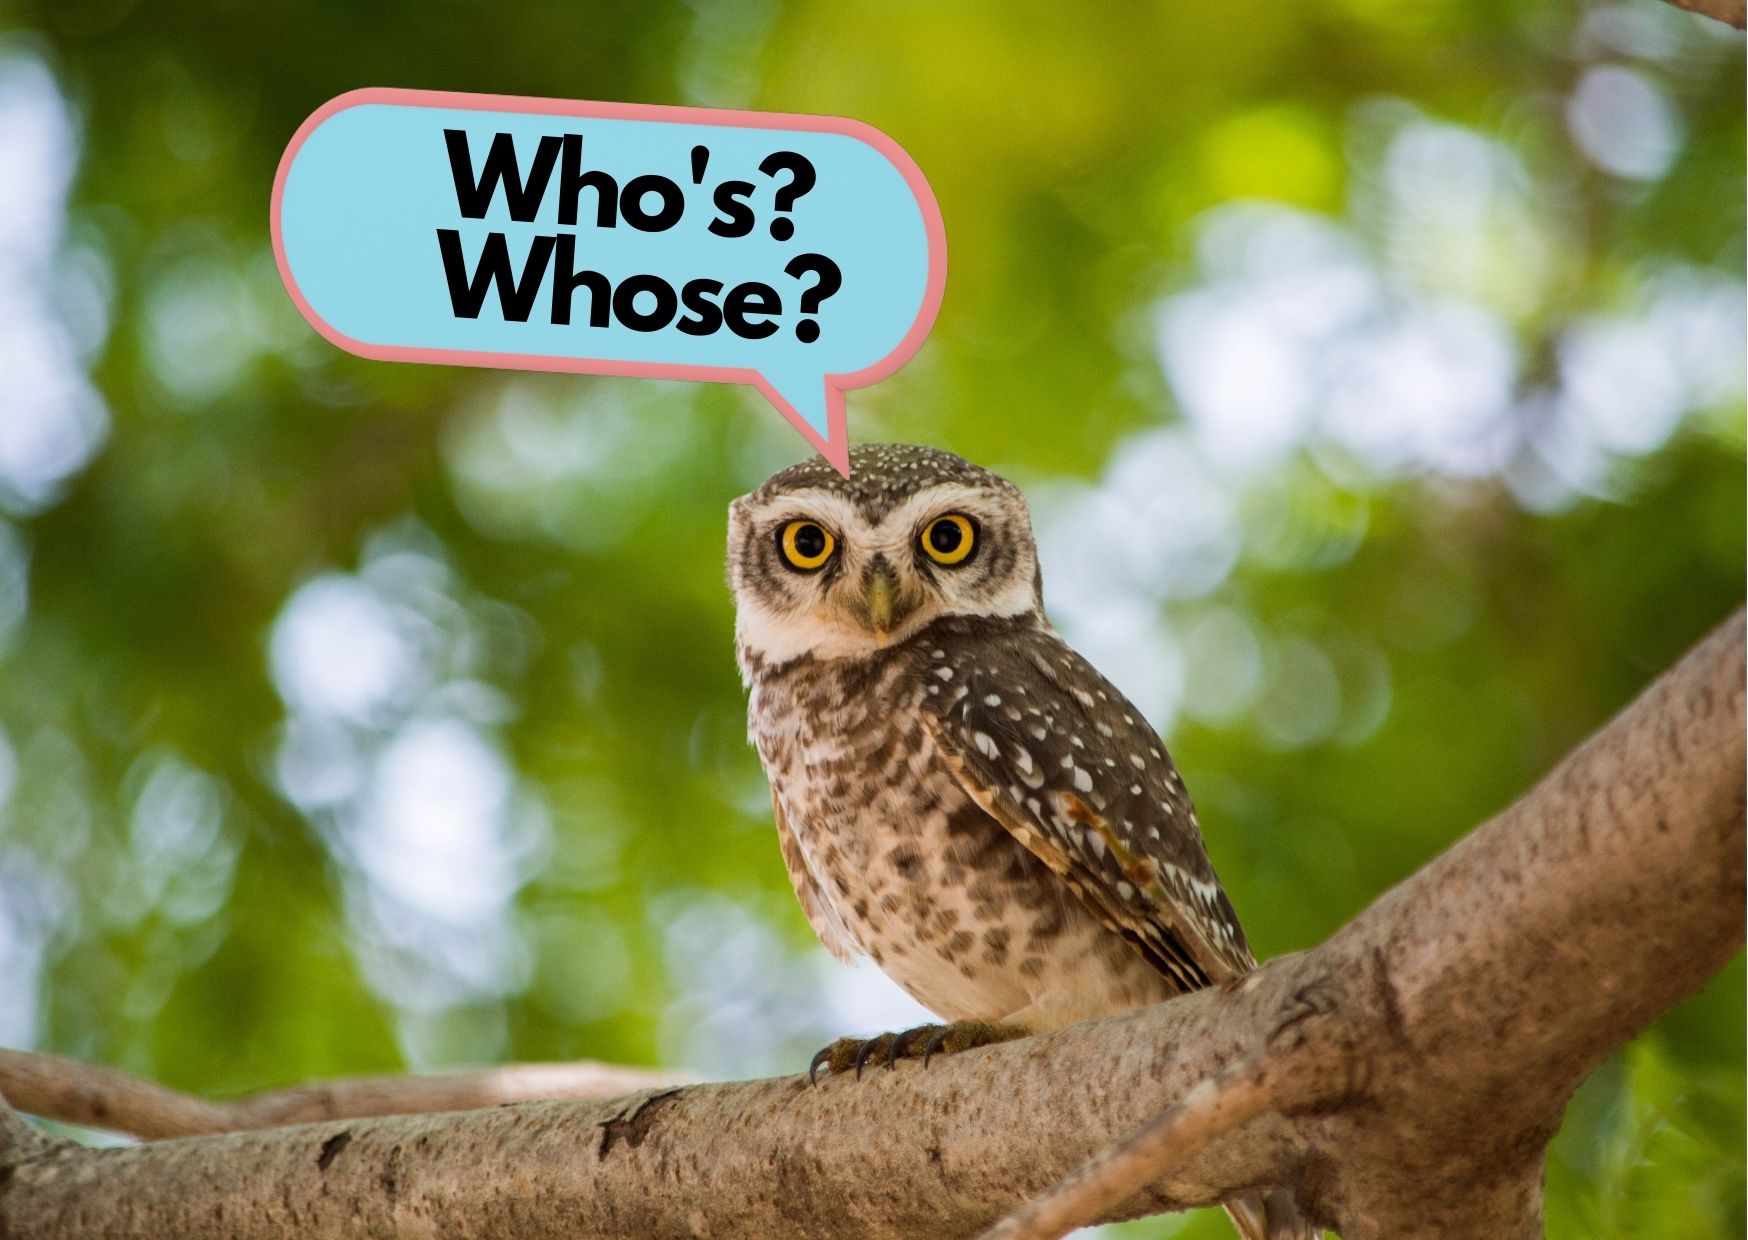 Owl with a speech bubble that says "Who's? Whose?"